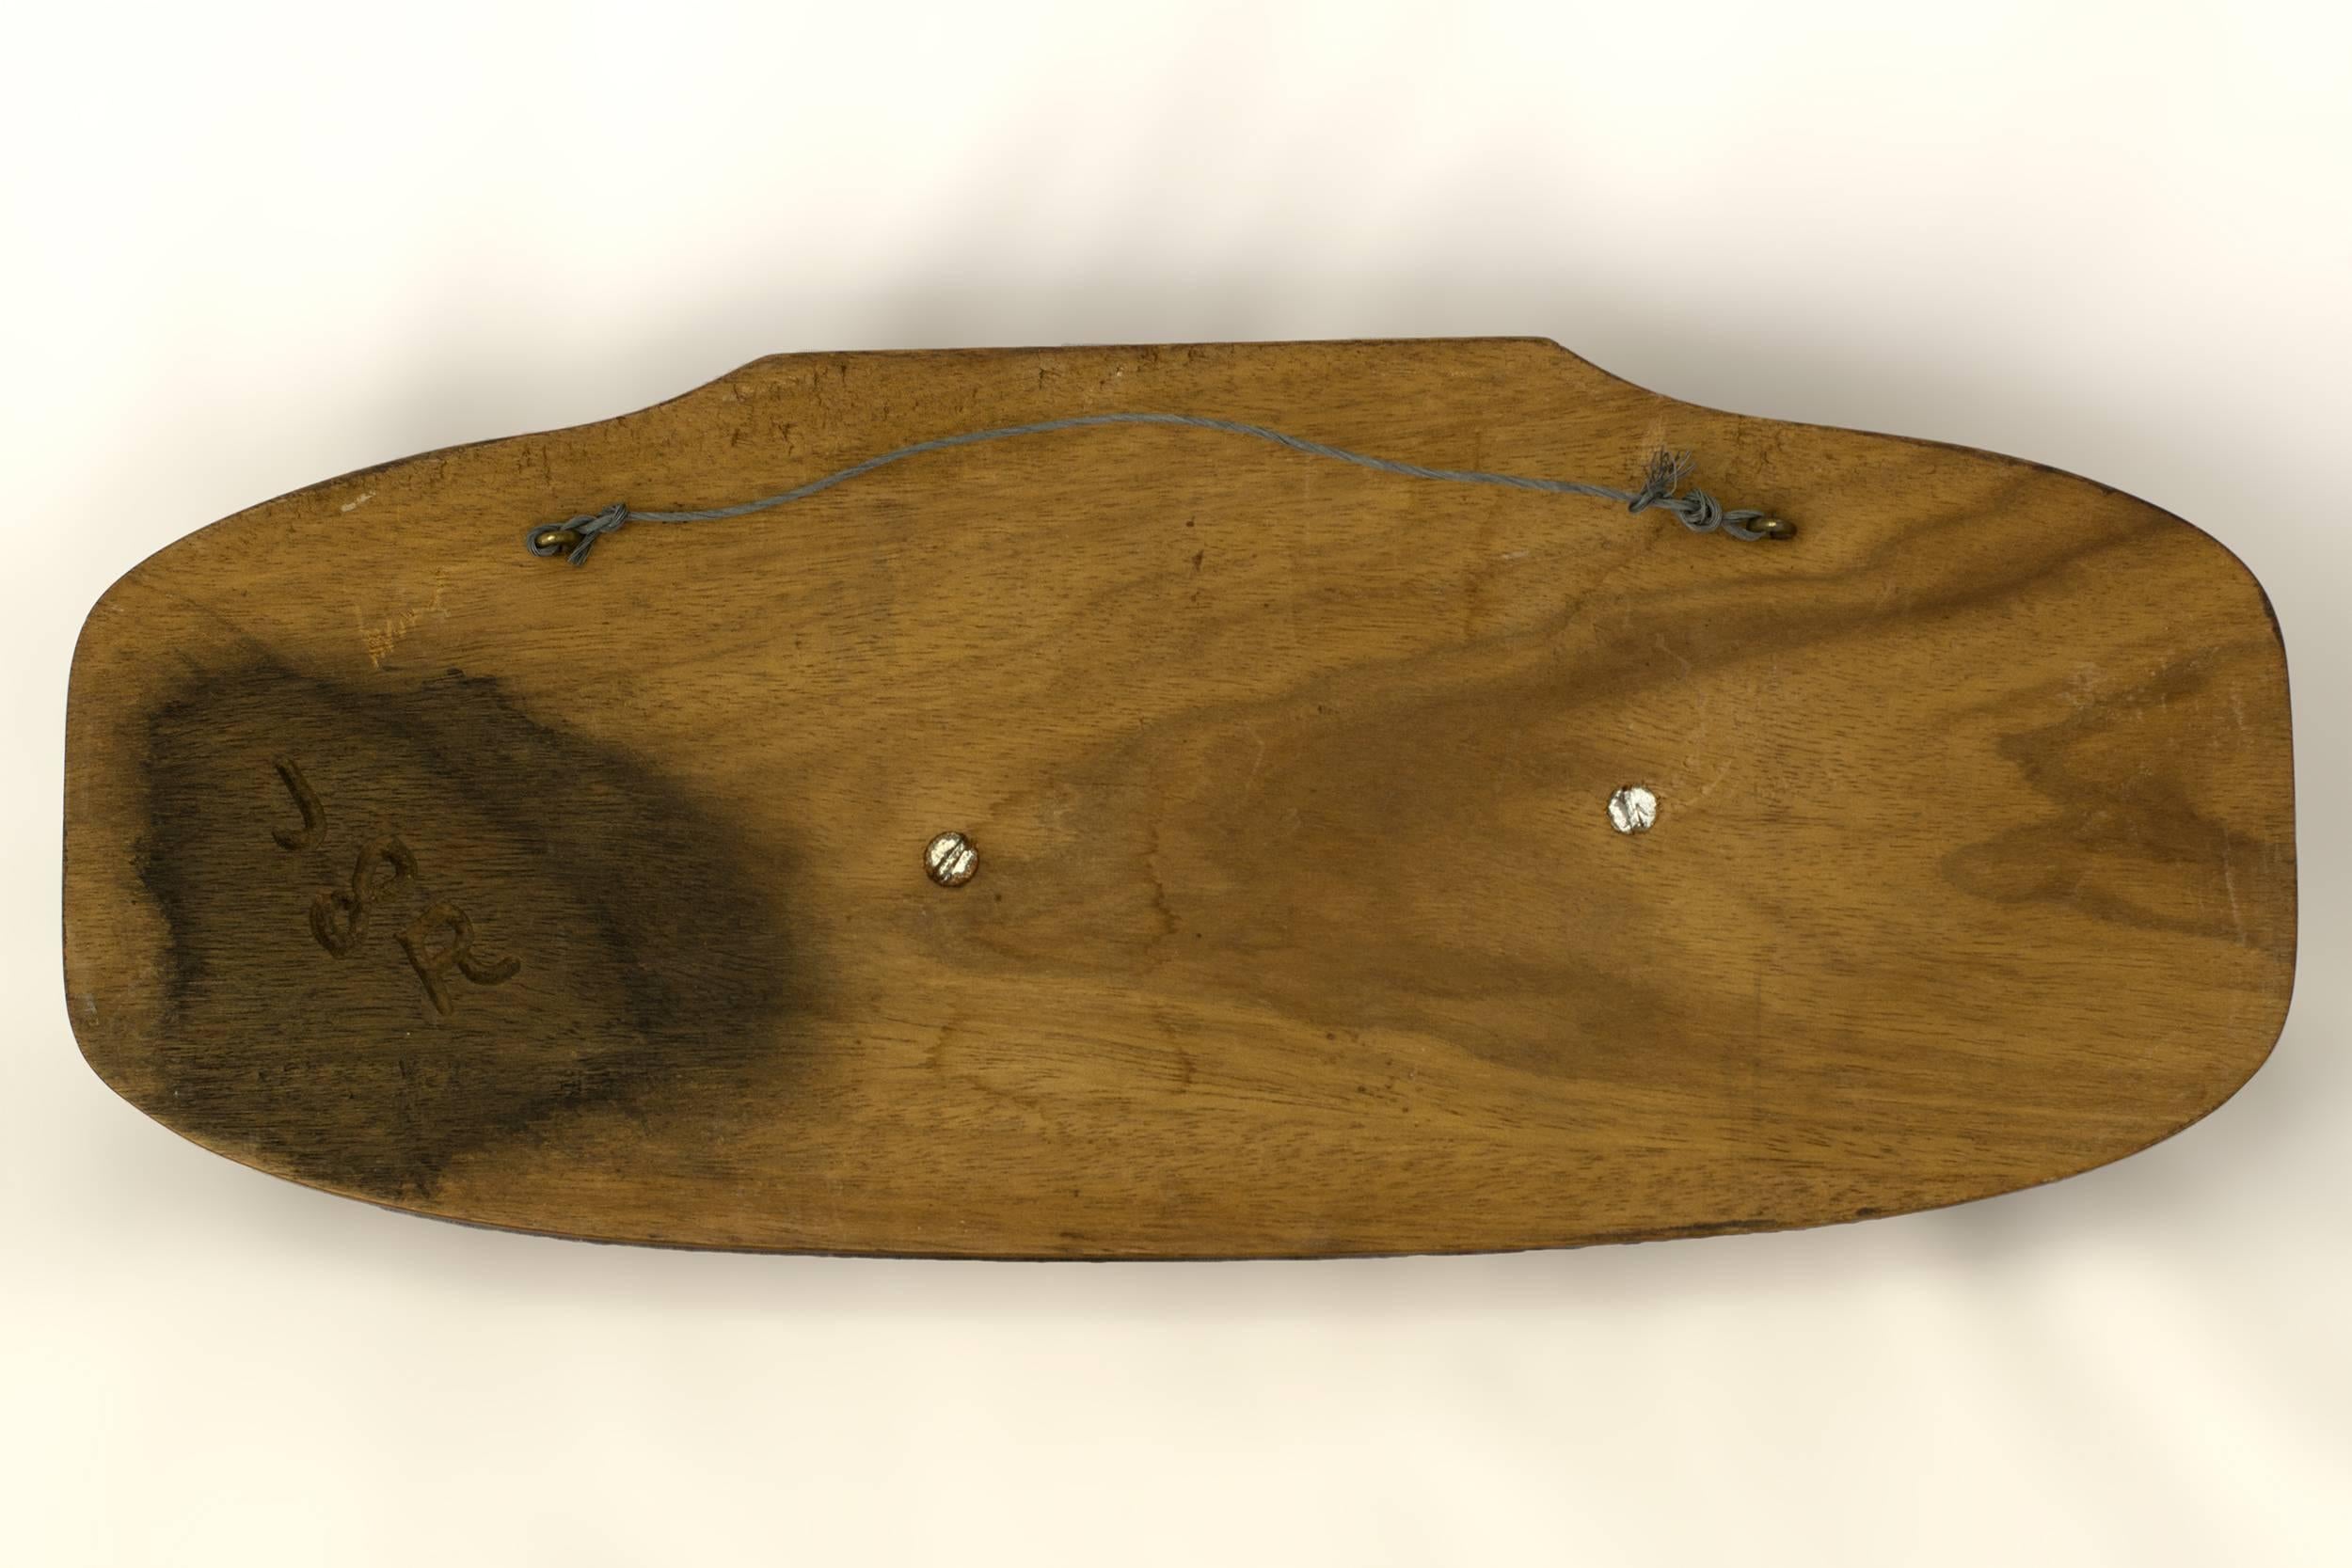 The sperm whale is carved out of black walnut and is mounted on a molded walnut carved plaque.